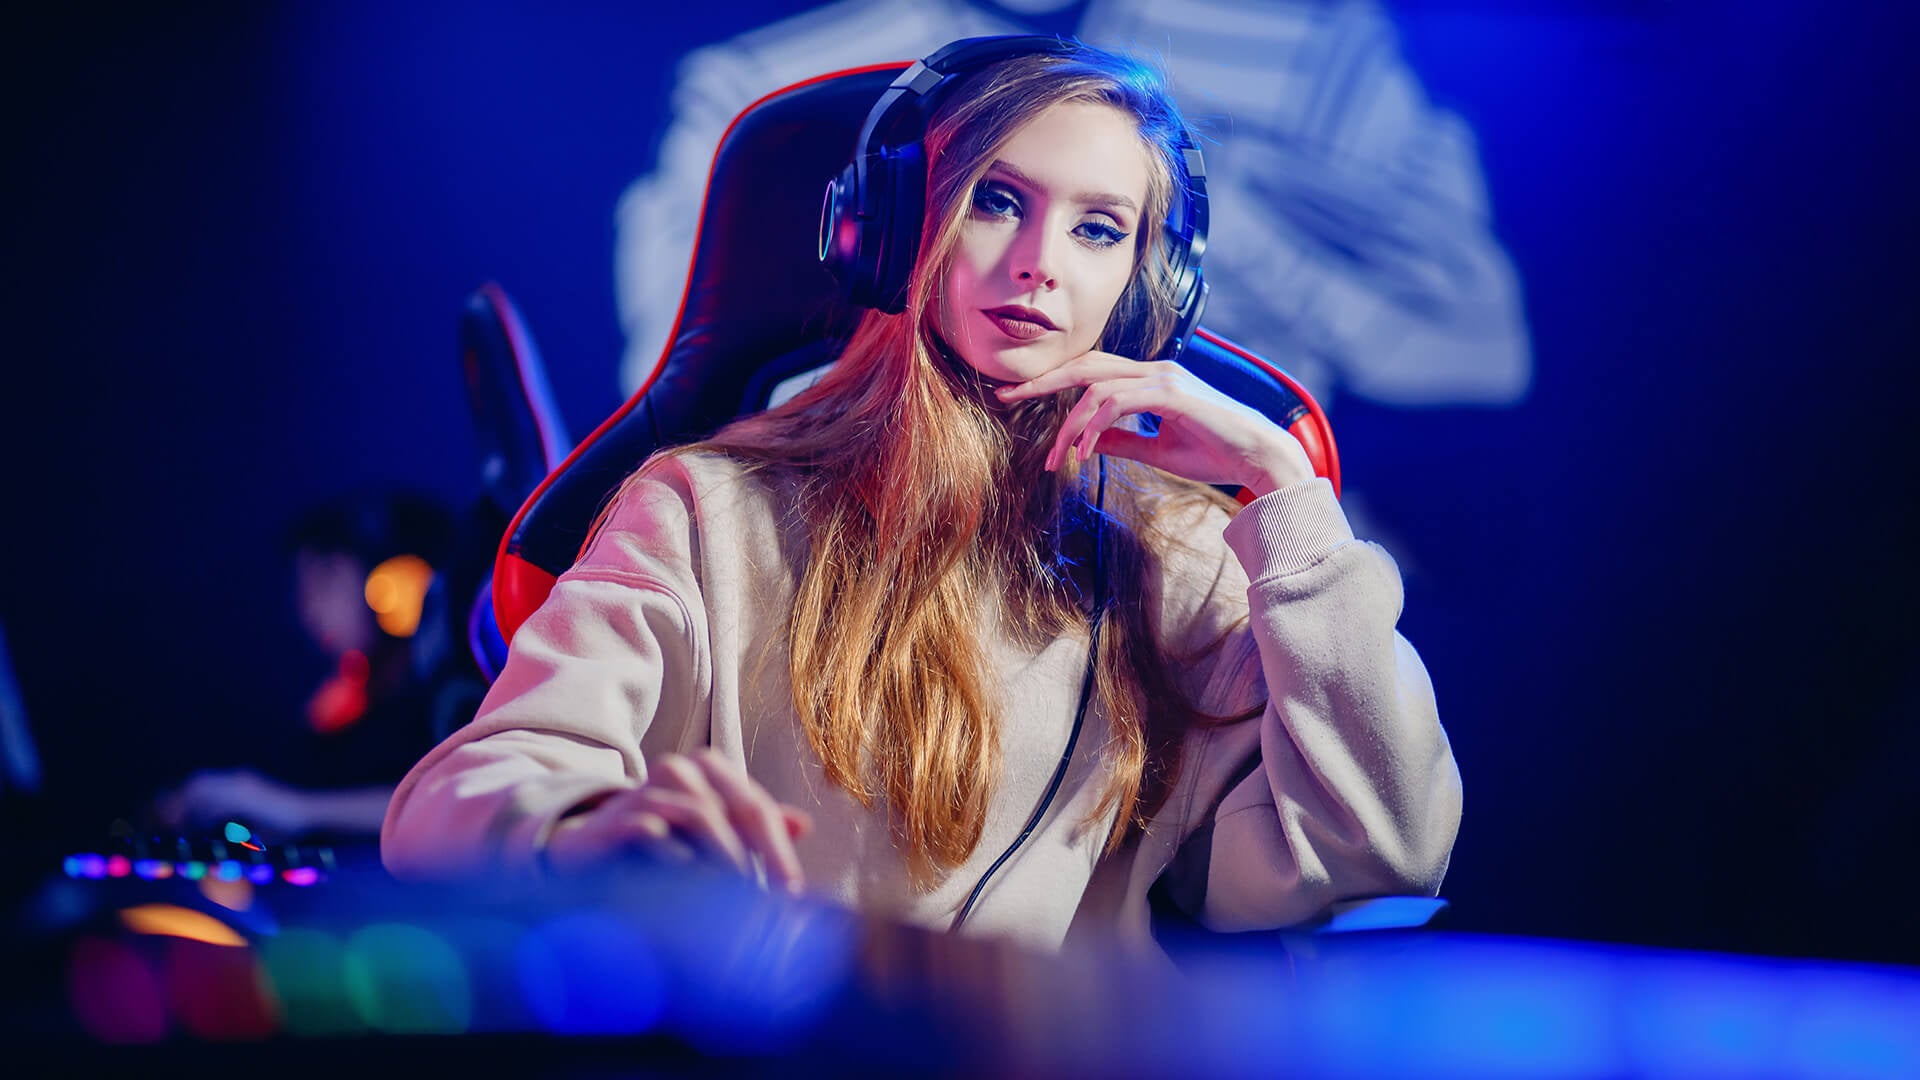 Learn what it takes to be a Pro Gamer